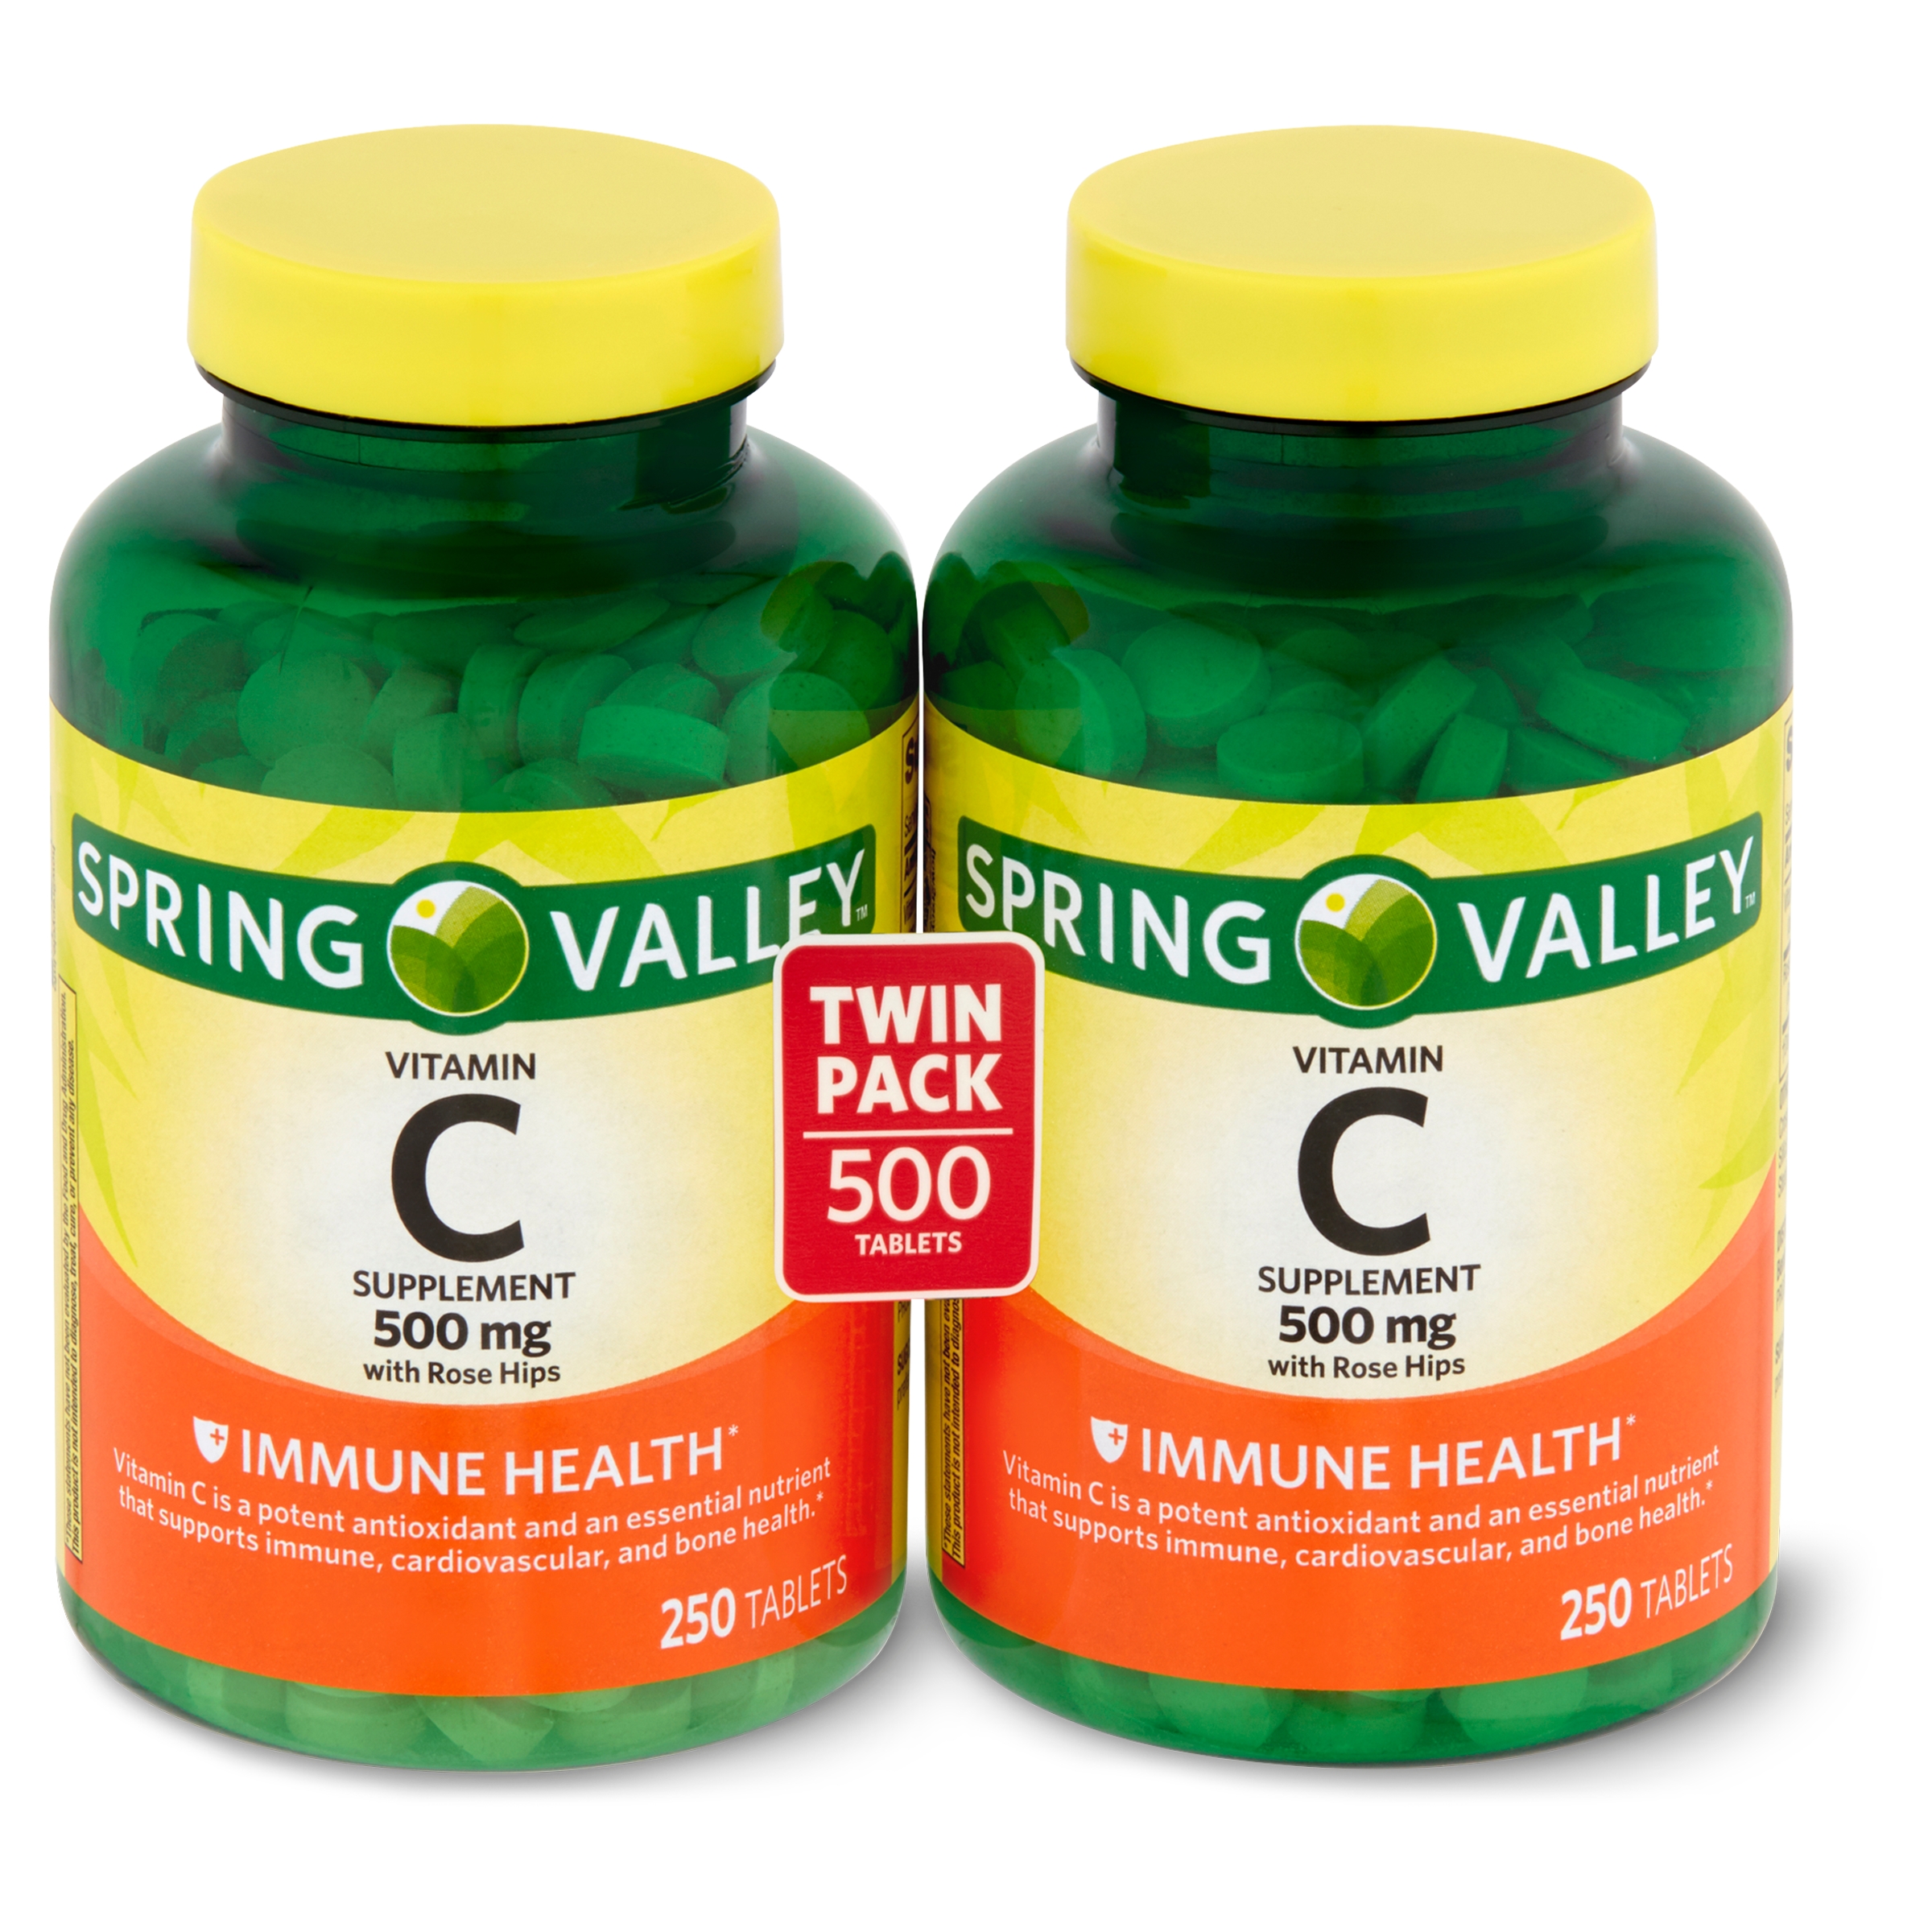 Spring Valley Vitamin C Supplement with Rose Hips, 500 mg, 500 Count, 2 Pack - image 1 of 9